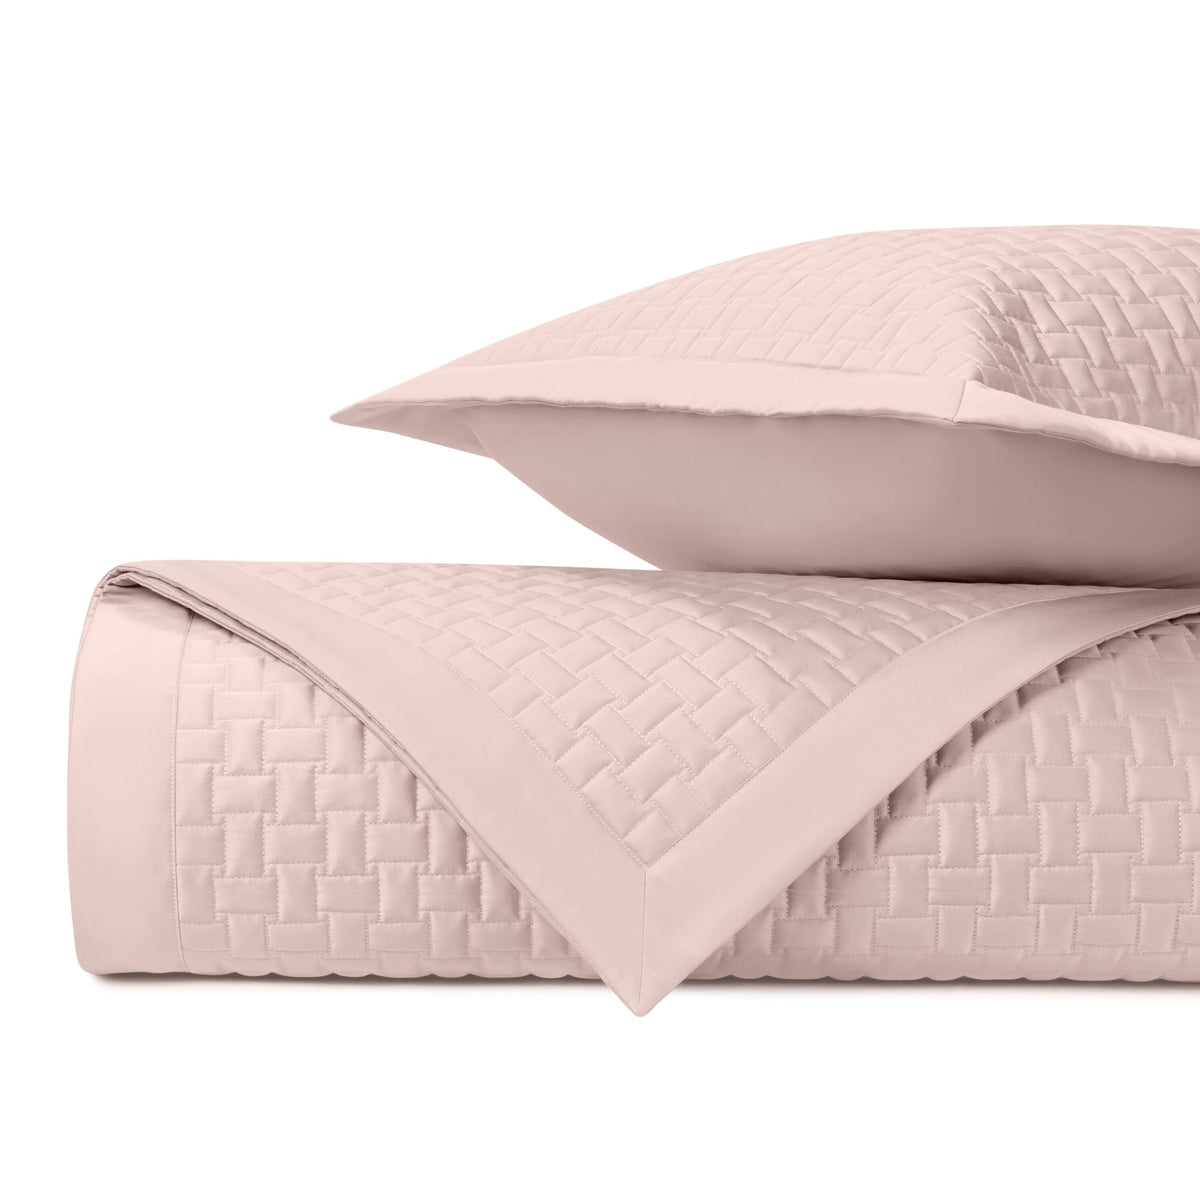 WICKER Quilted Coverlet in Light Pink by Home Treasures at Fig Linens and Home